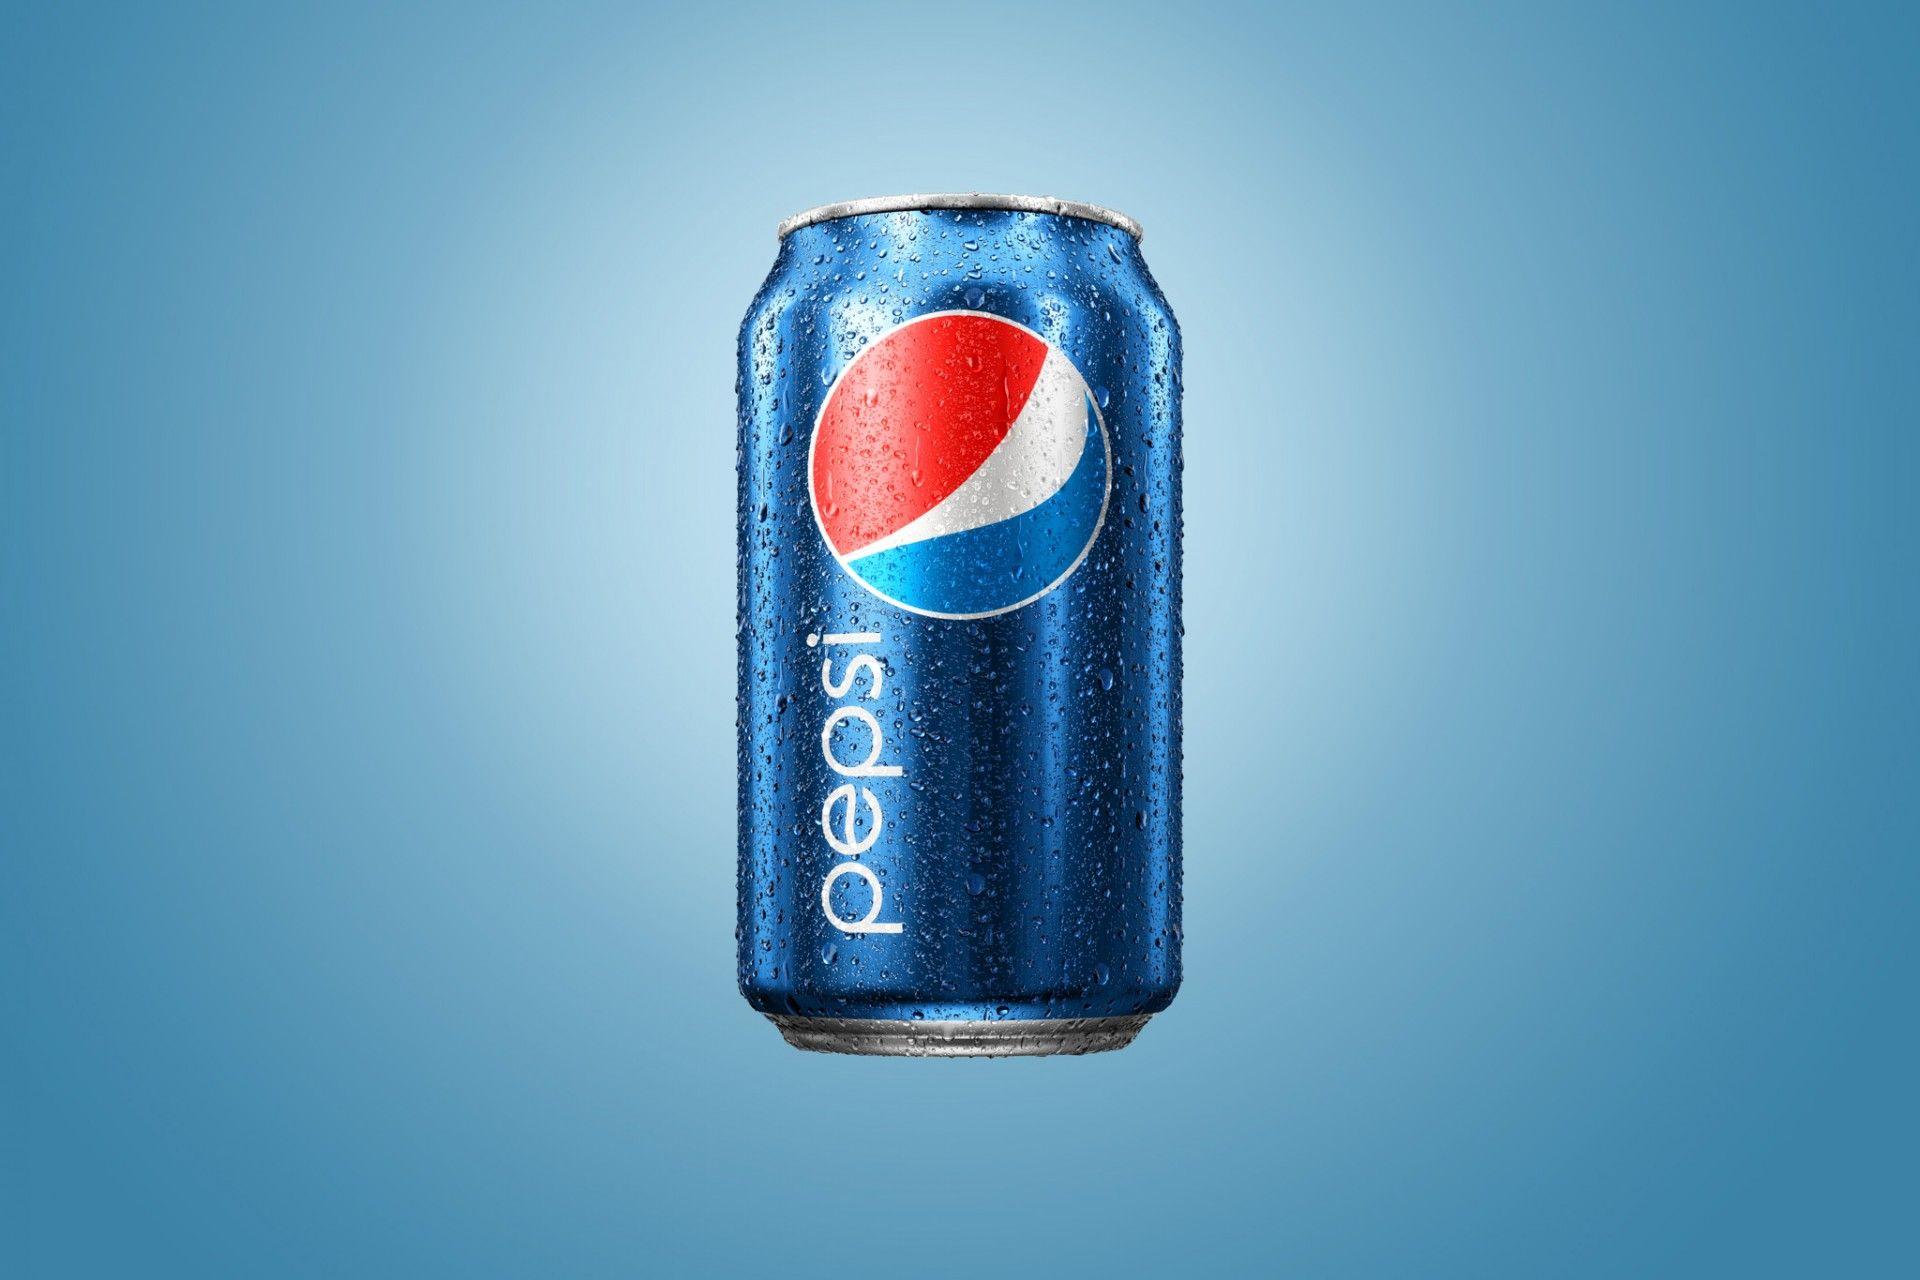 Pepsi Wallpaper for PC. Full HD Picture